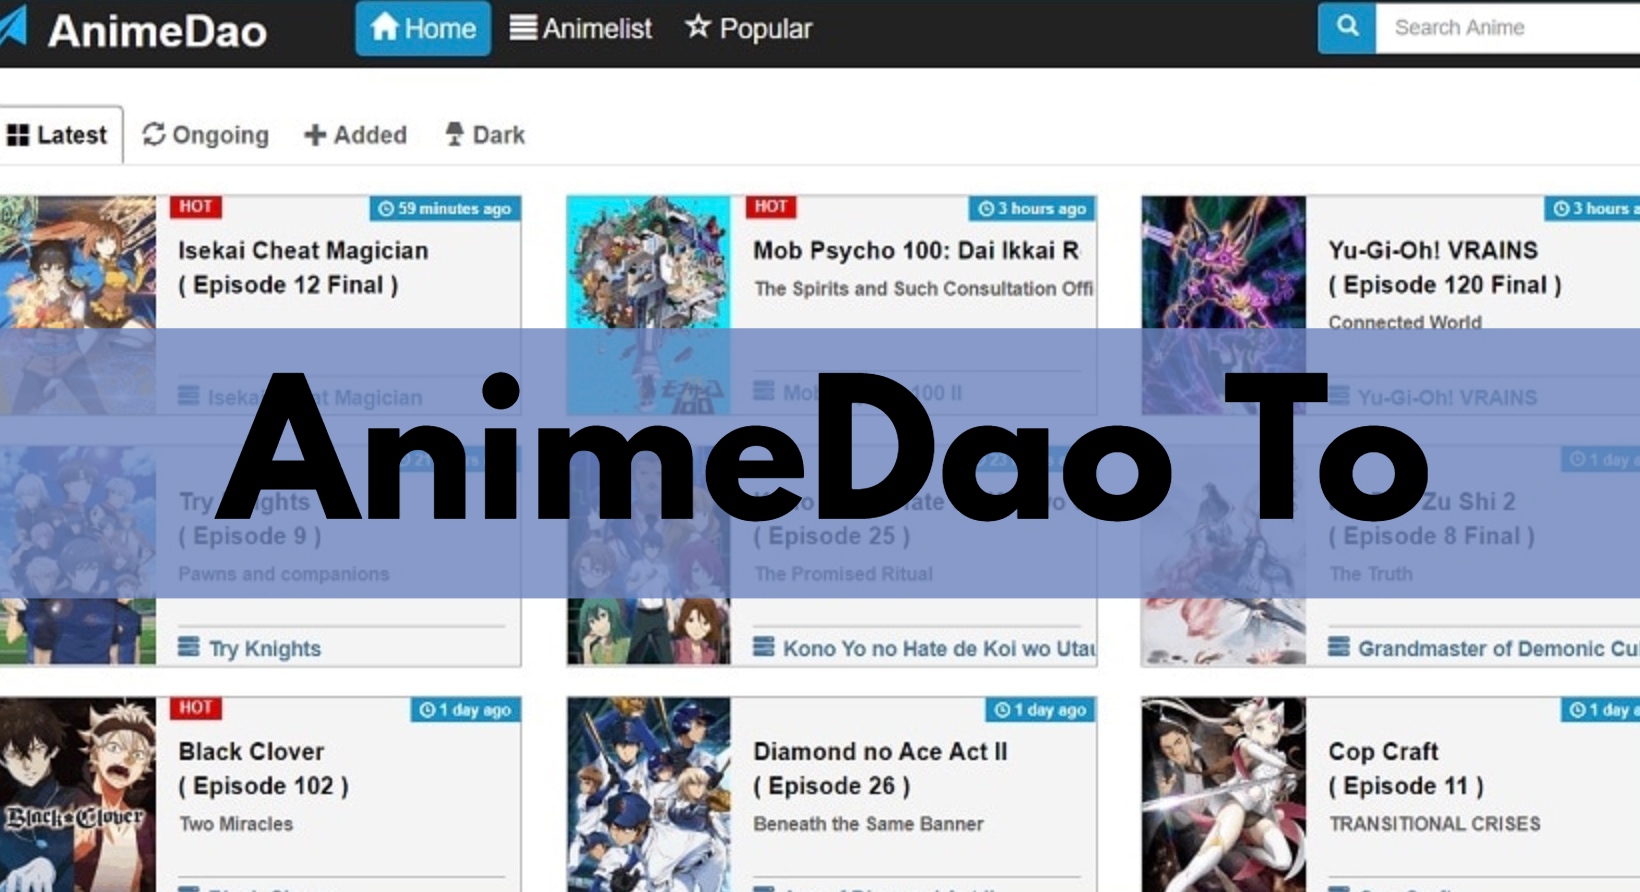 Animedao To - Get A Big Chunk Of Anime Shows And Movies Here For Free